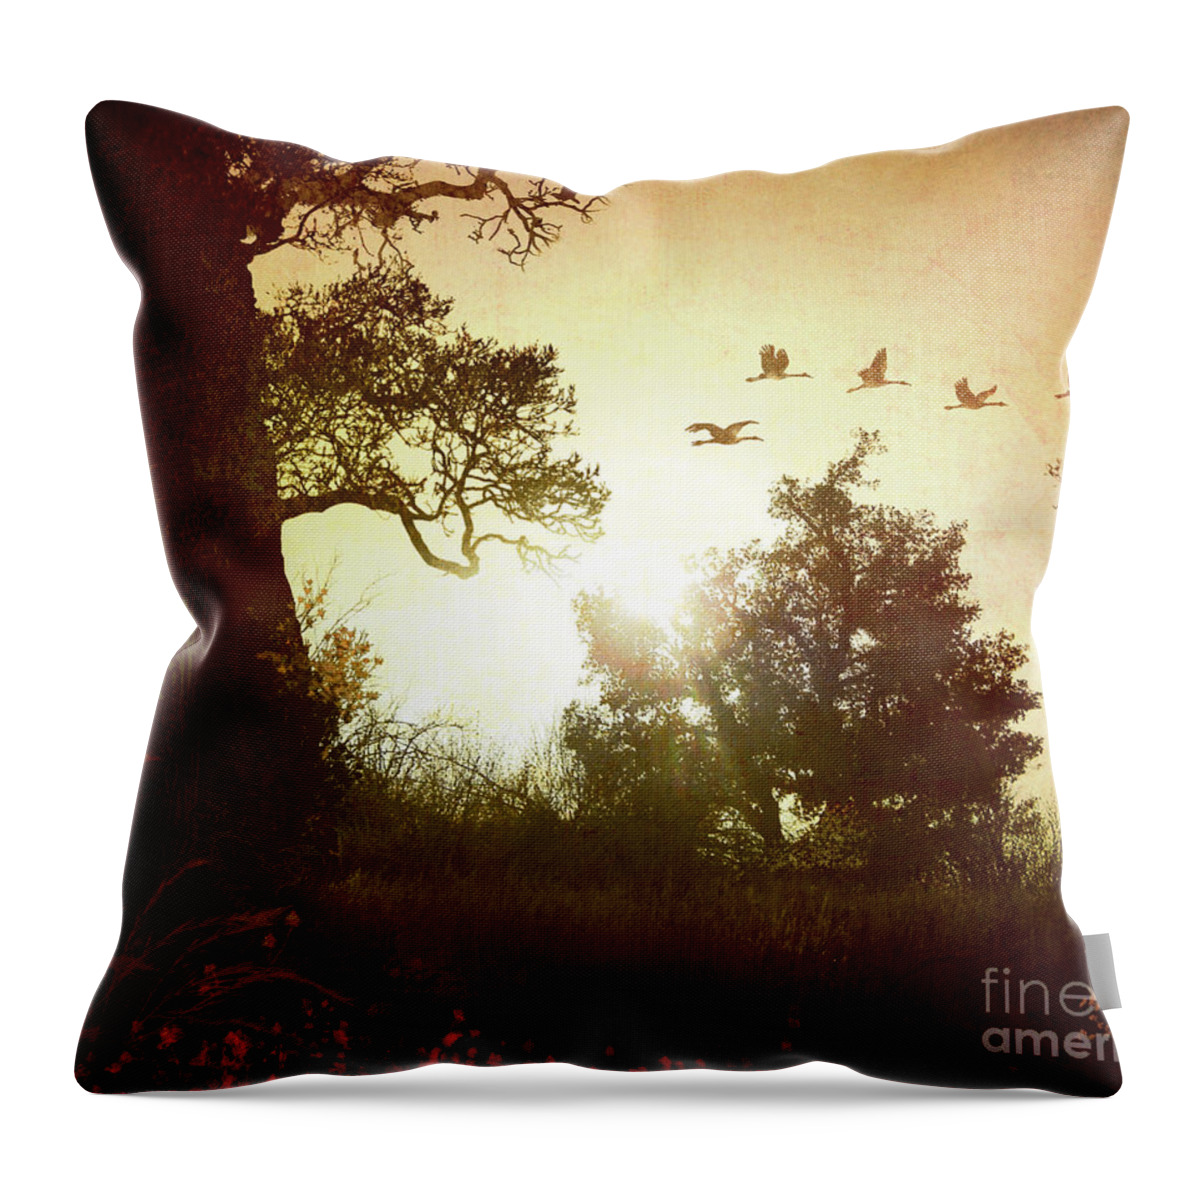 Digital Throw Pillow featuring the photograph Evening Flying Geese by Peter Awax